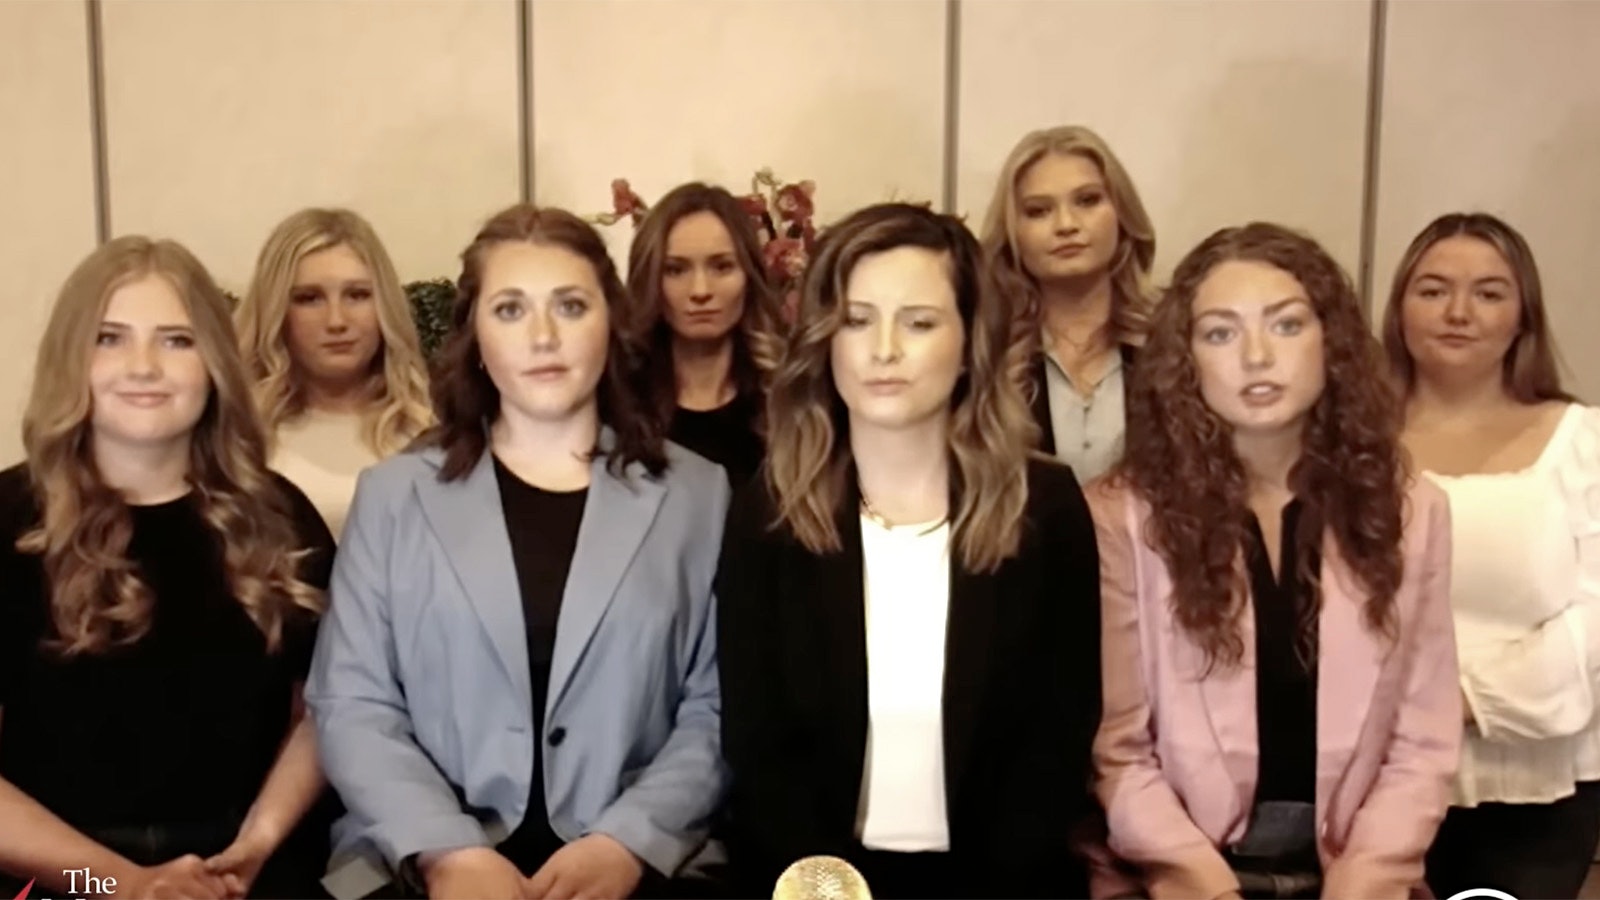 The University of Wyoming sorority members suing over admitting a transgender member, along with one of their lawyers, were interviewed by Megyn Kelly on Monday. They said that their lawsuit will be important for women's rights.